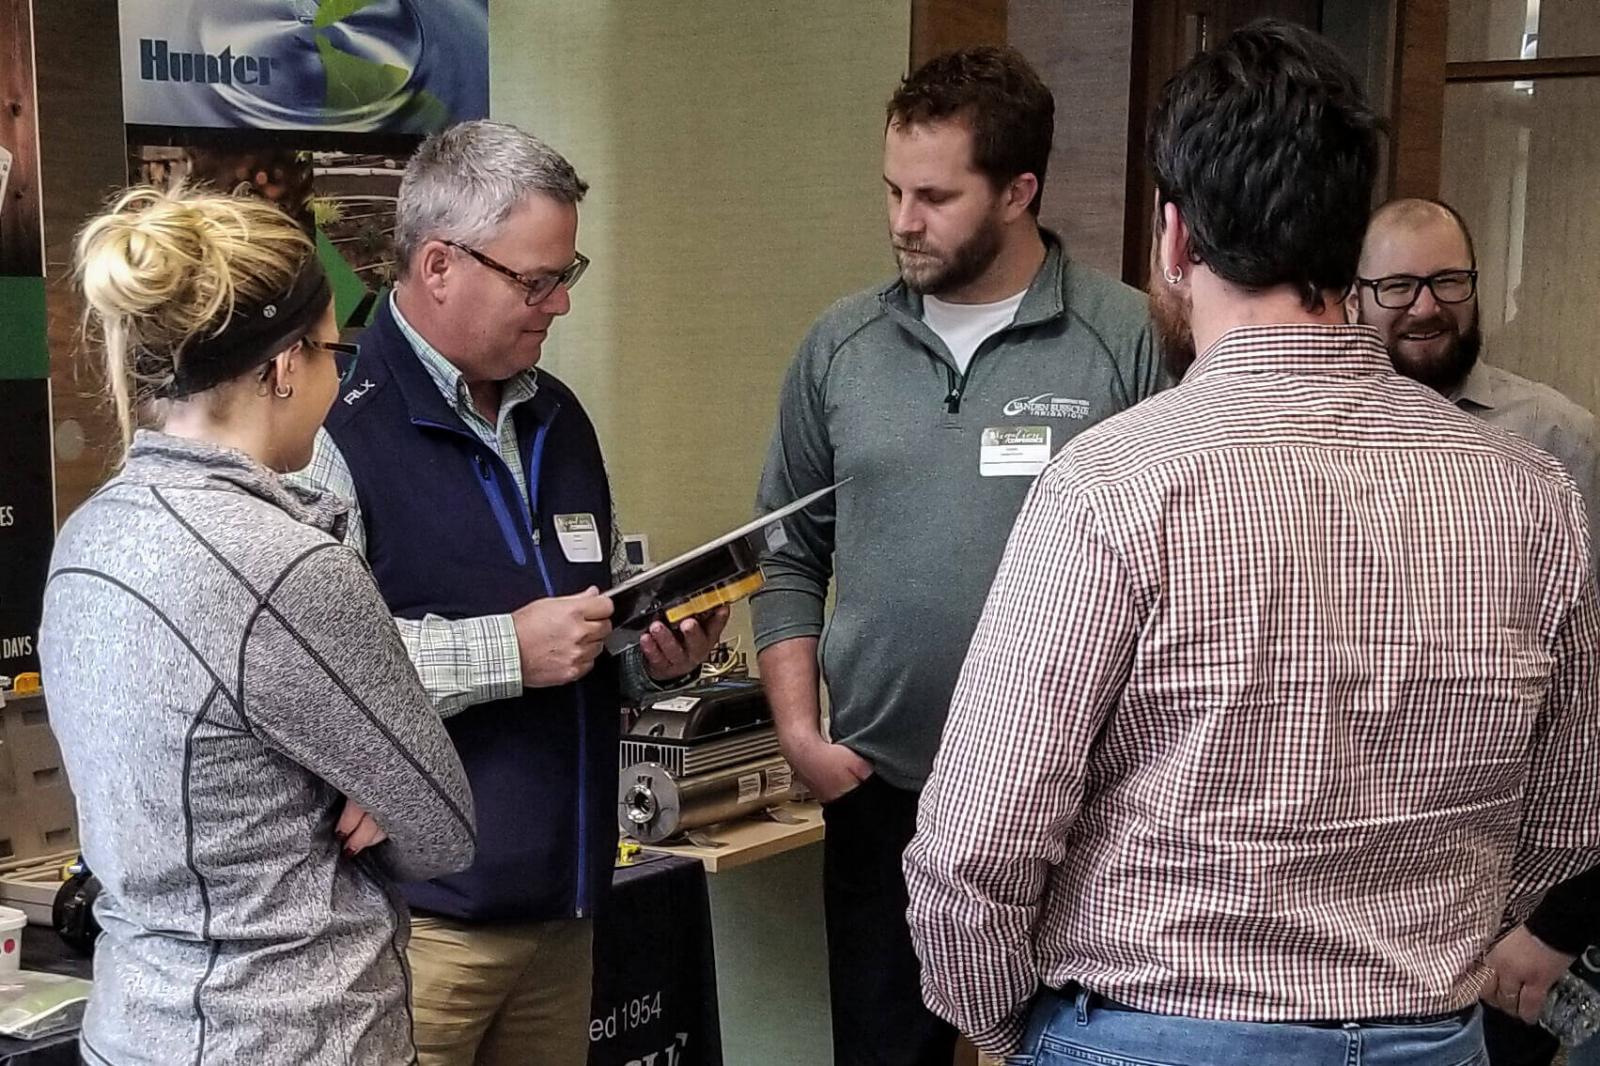 Irrigation pros connect at annual conference